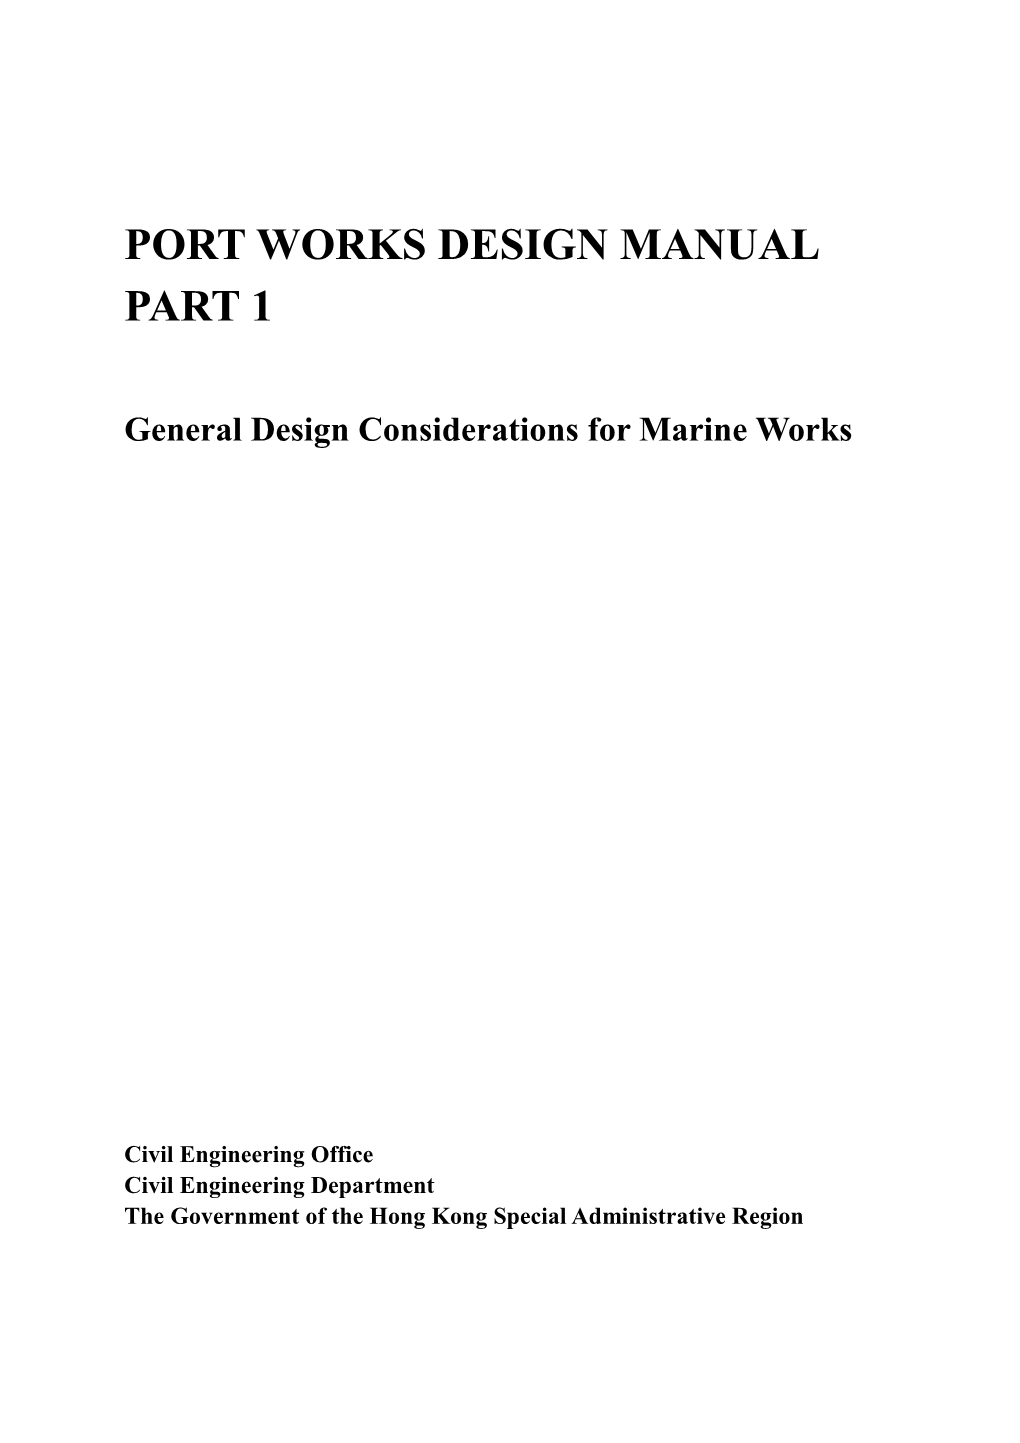 Part 1 – General Design Considerations For Marine Works